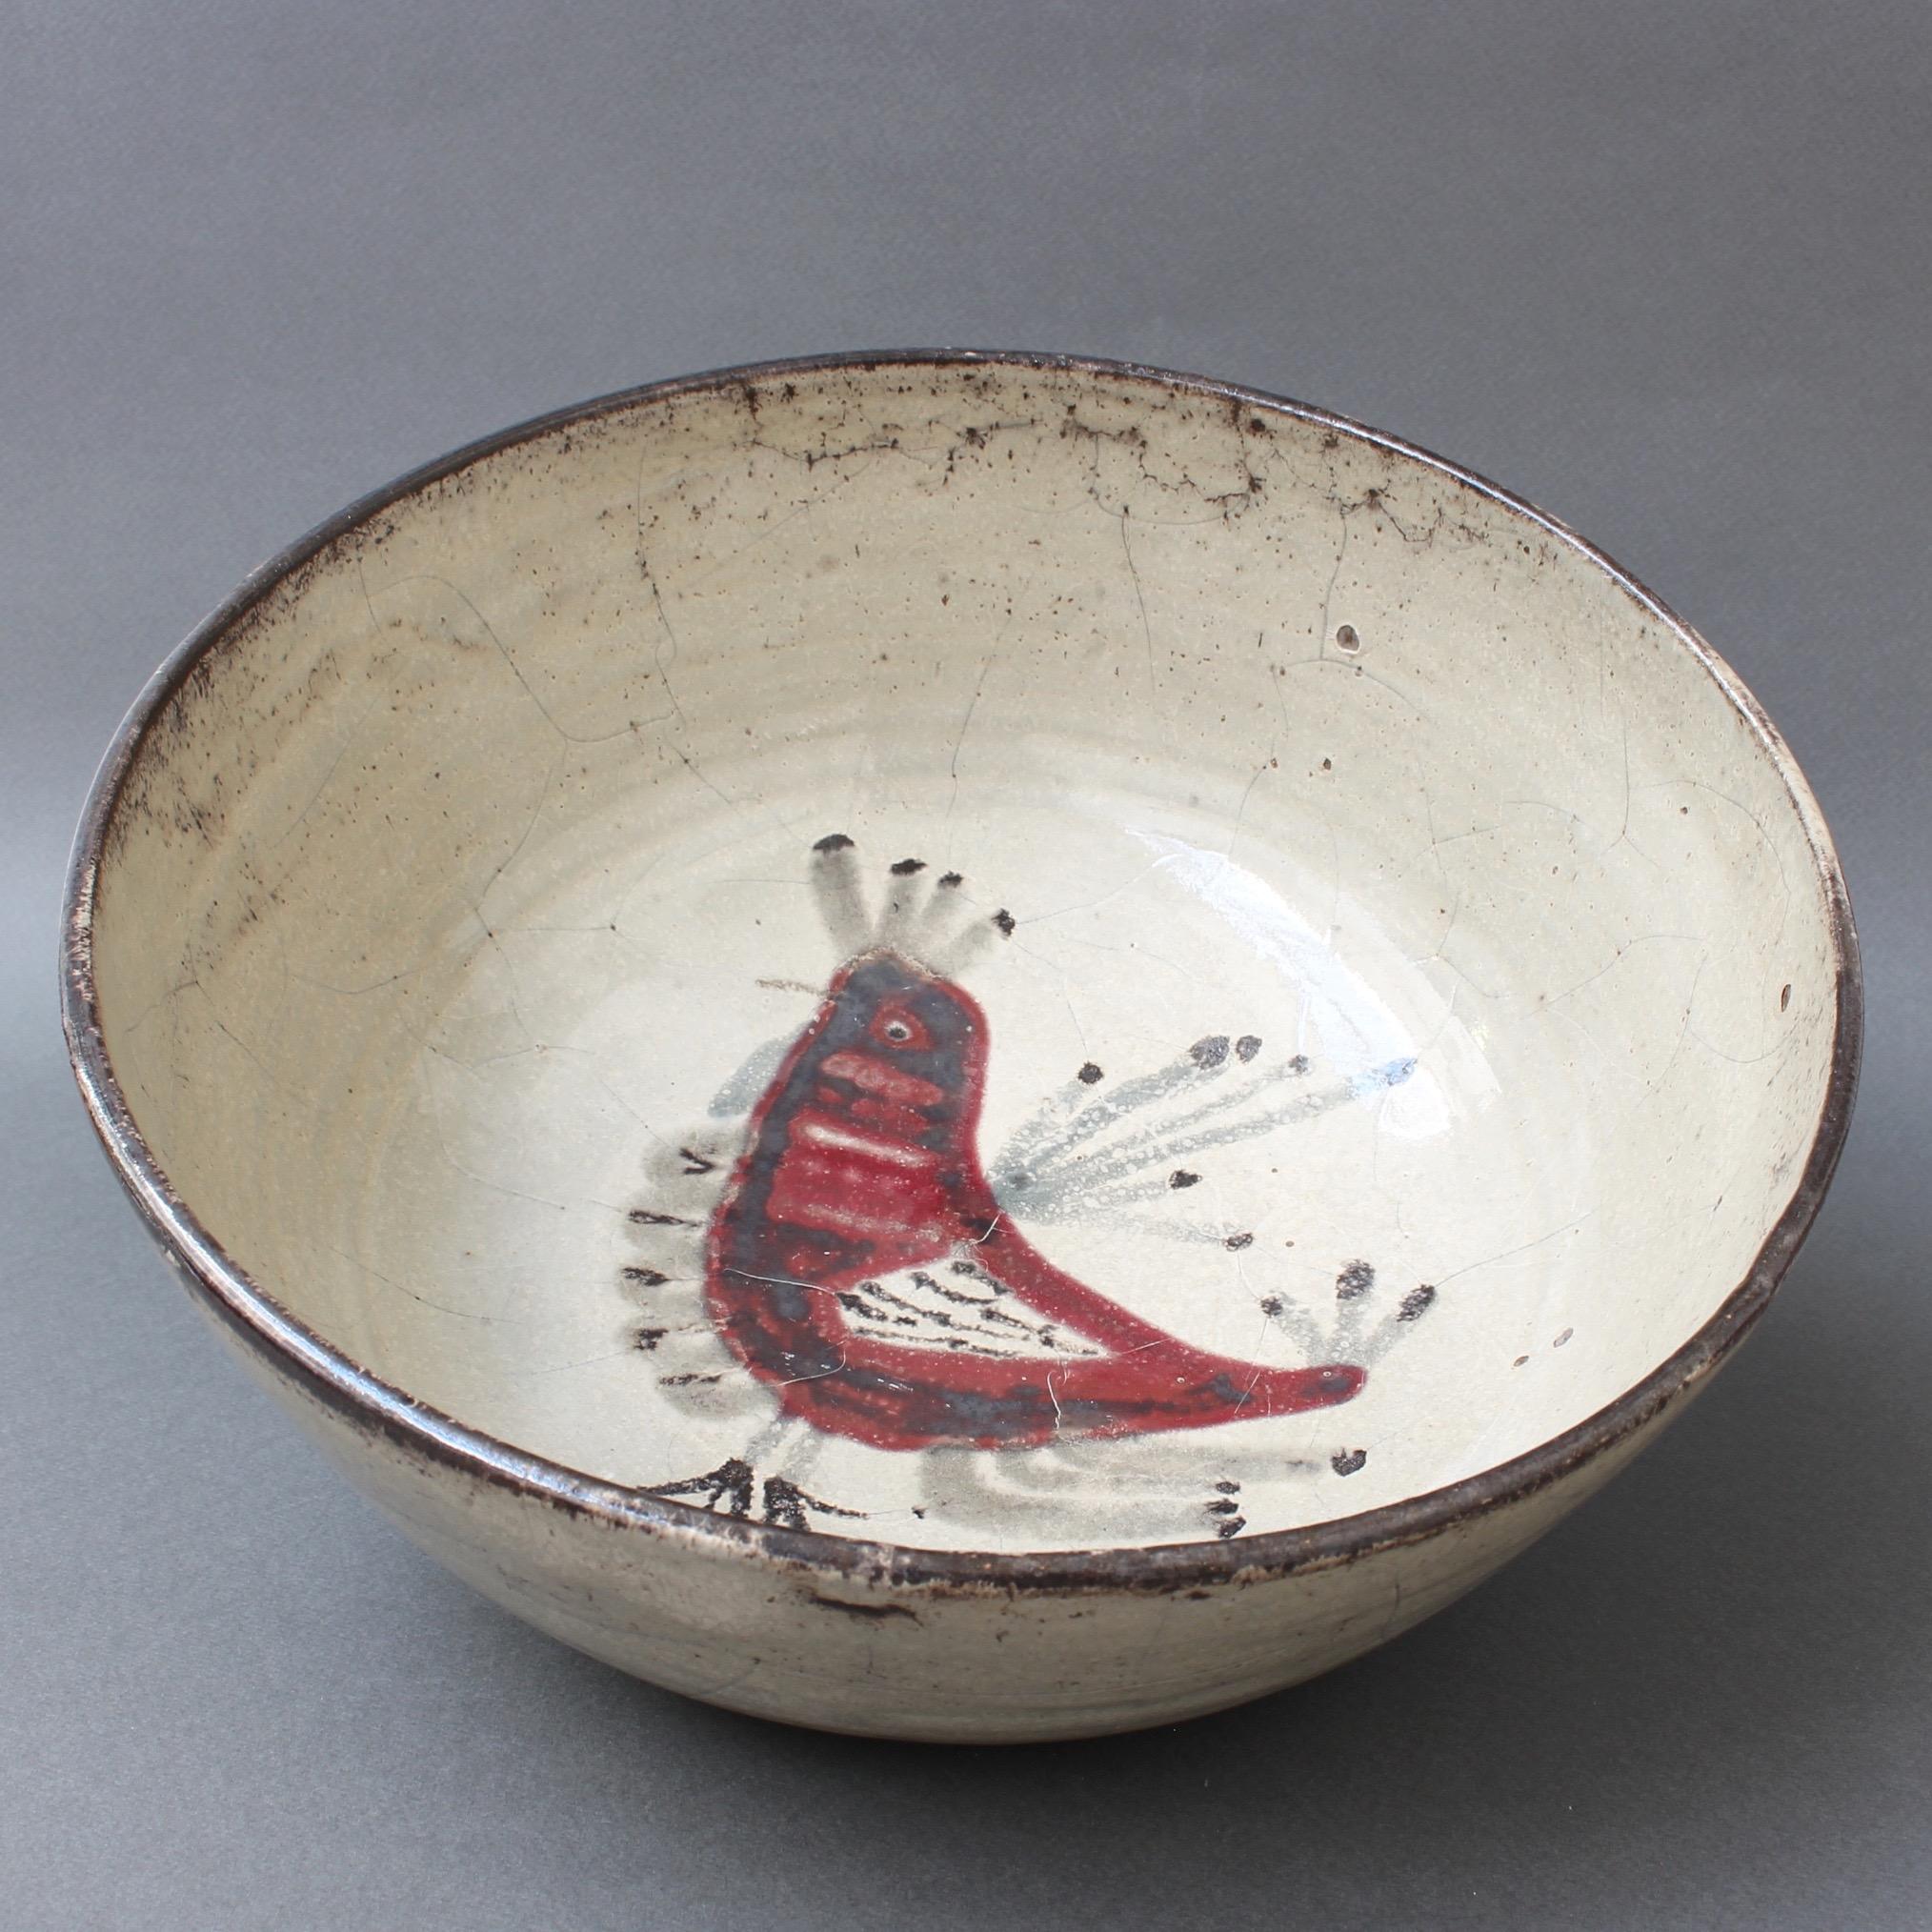 Hand-Painted 'Ceramic French Rooster Motif Bowl' by Gustave Reynaud - Le Mûrier, circa 1950s